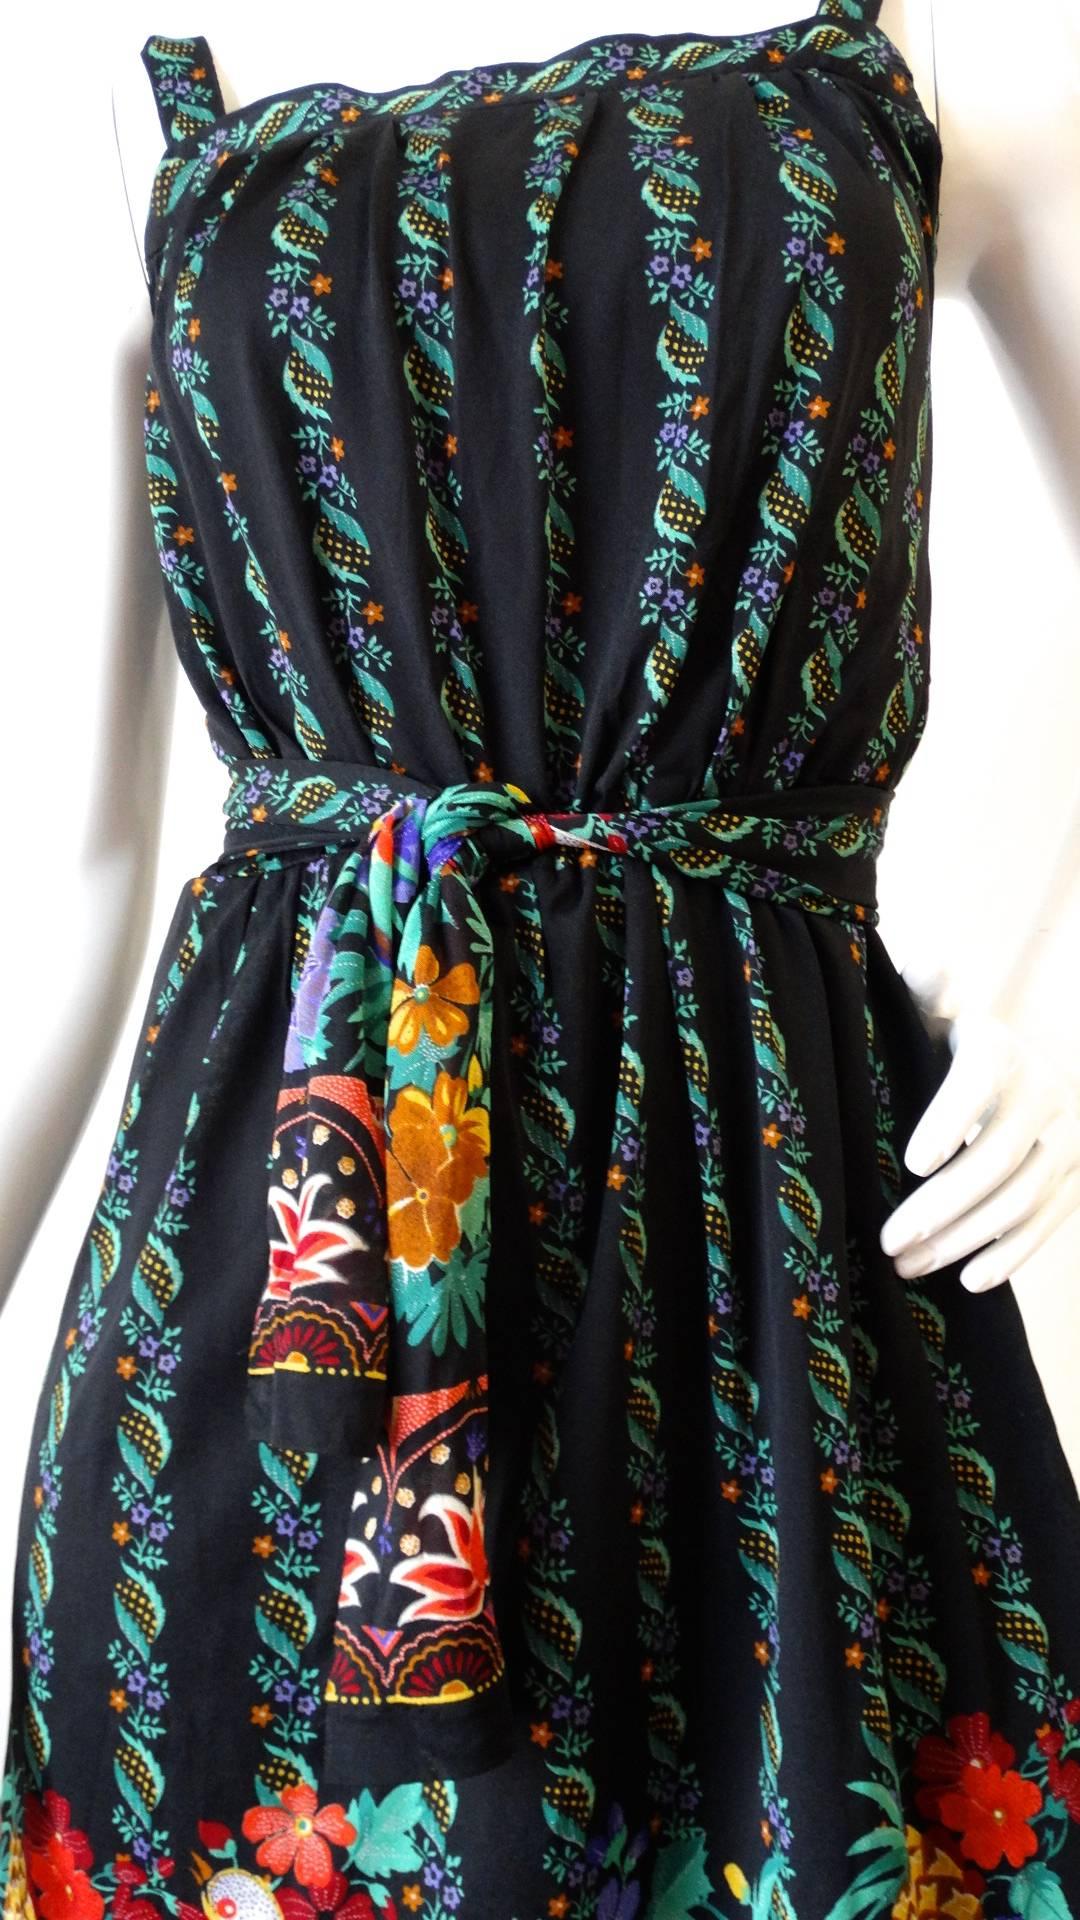 It's not Gucci it's Gottex! Rock the spirit of the 1970s in our incredible Gottex floral dress! Black sheer stretch fabric with striped multicolor floral print. Colorful birds hidden within the floral pattern around the skirt. Cinches in perfectly